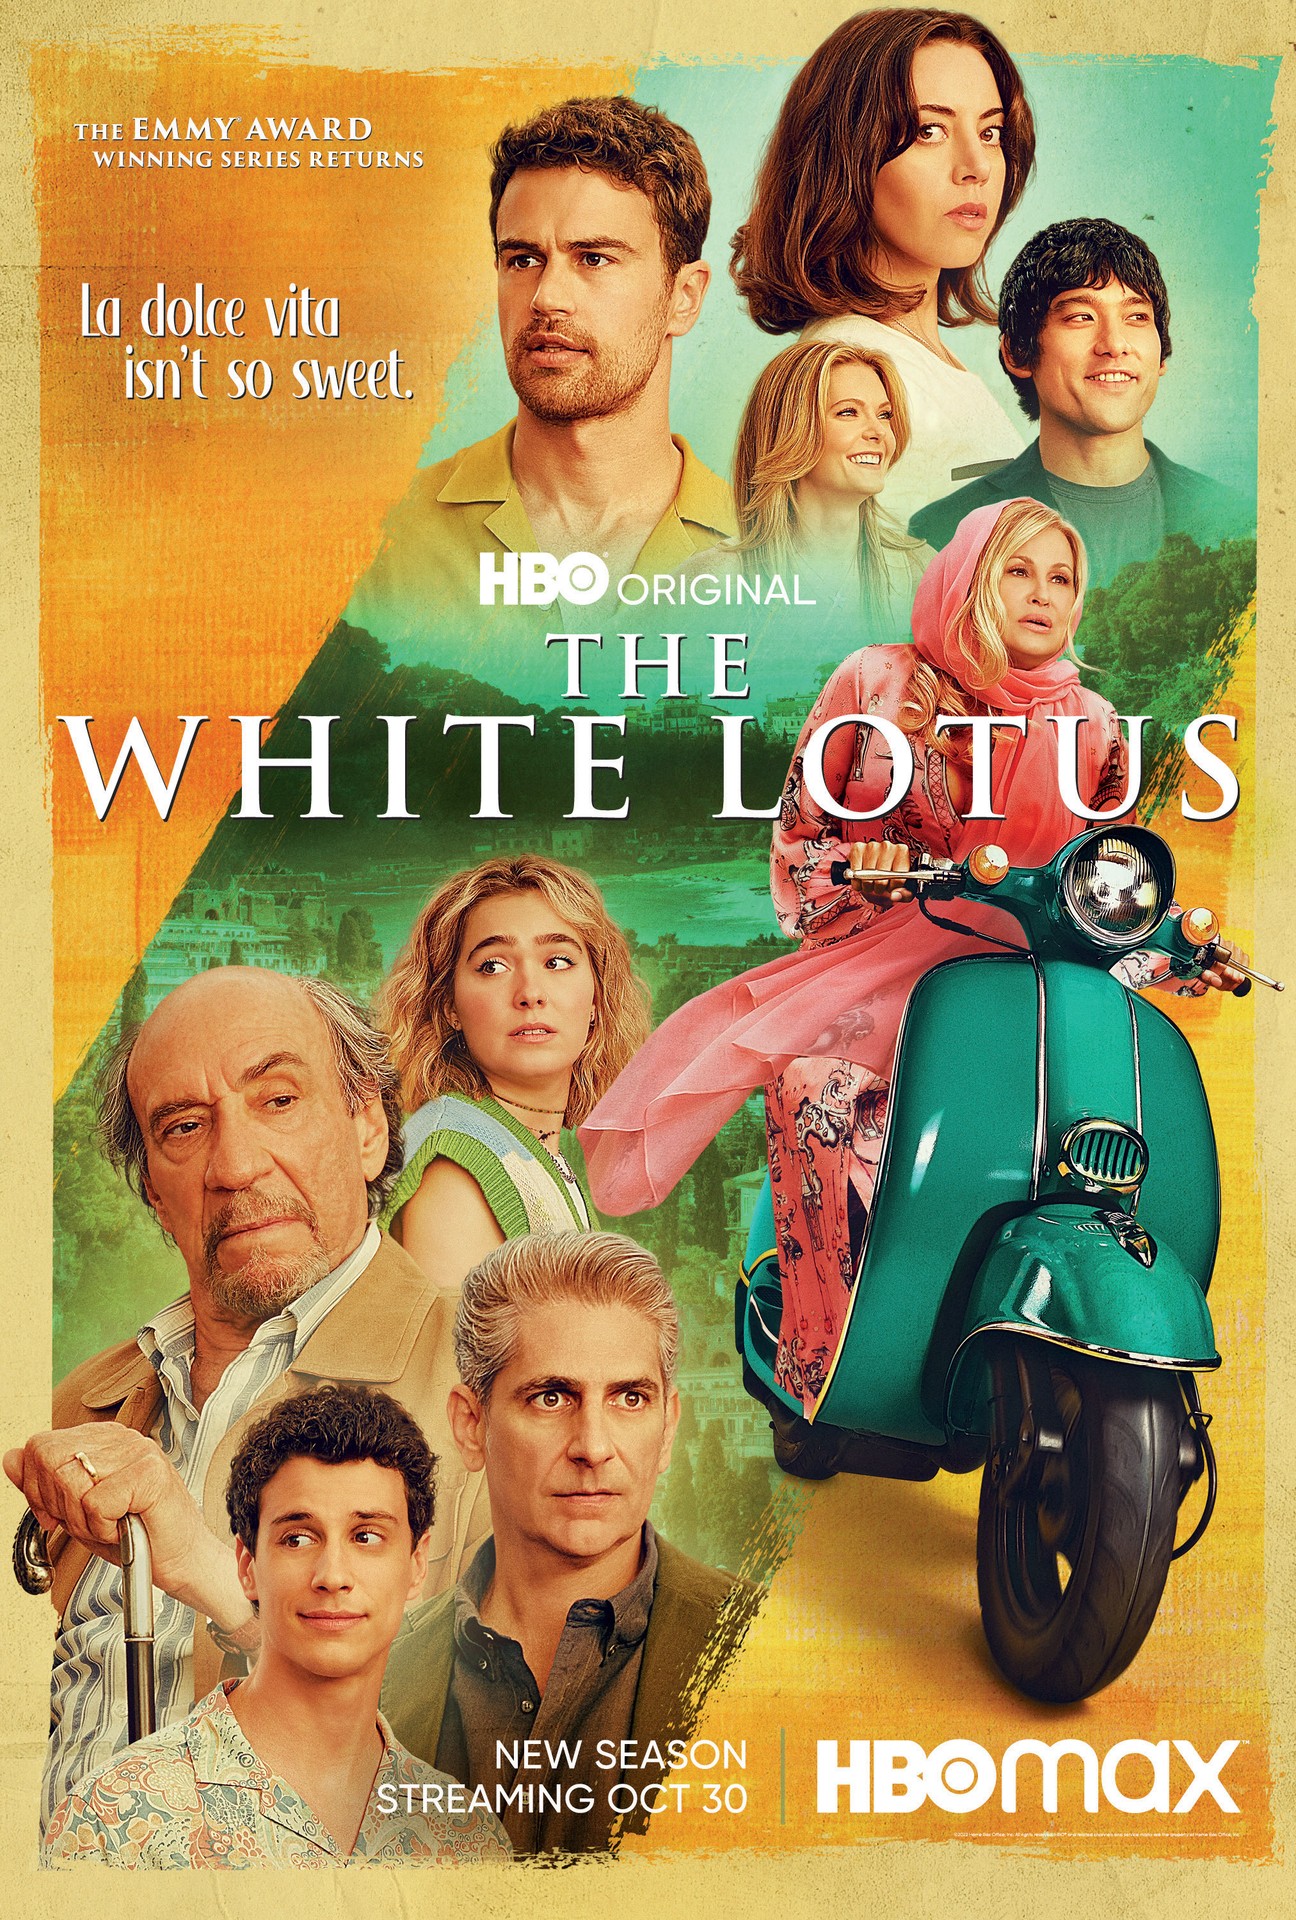 18 Weird Moments From The White Lotus Premiere